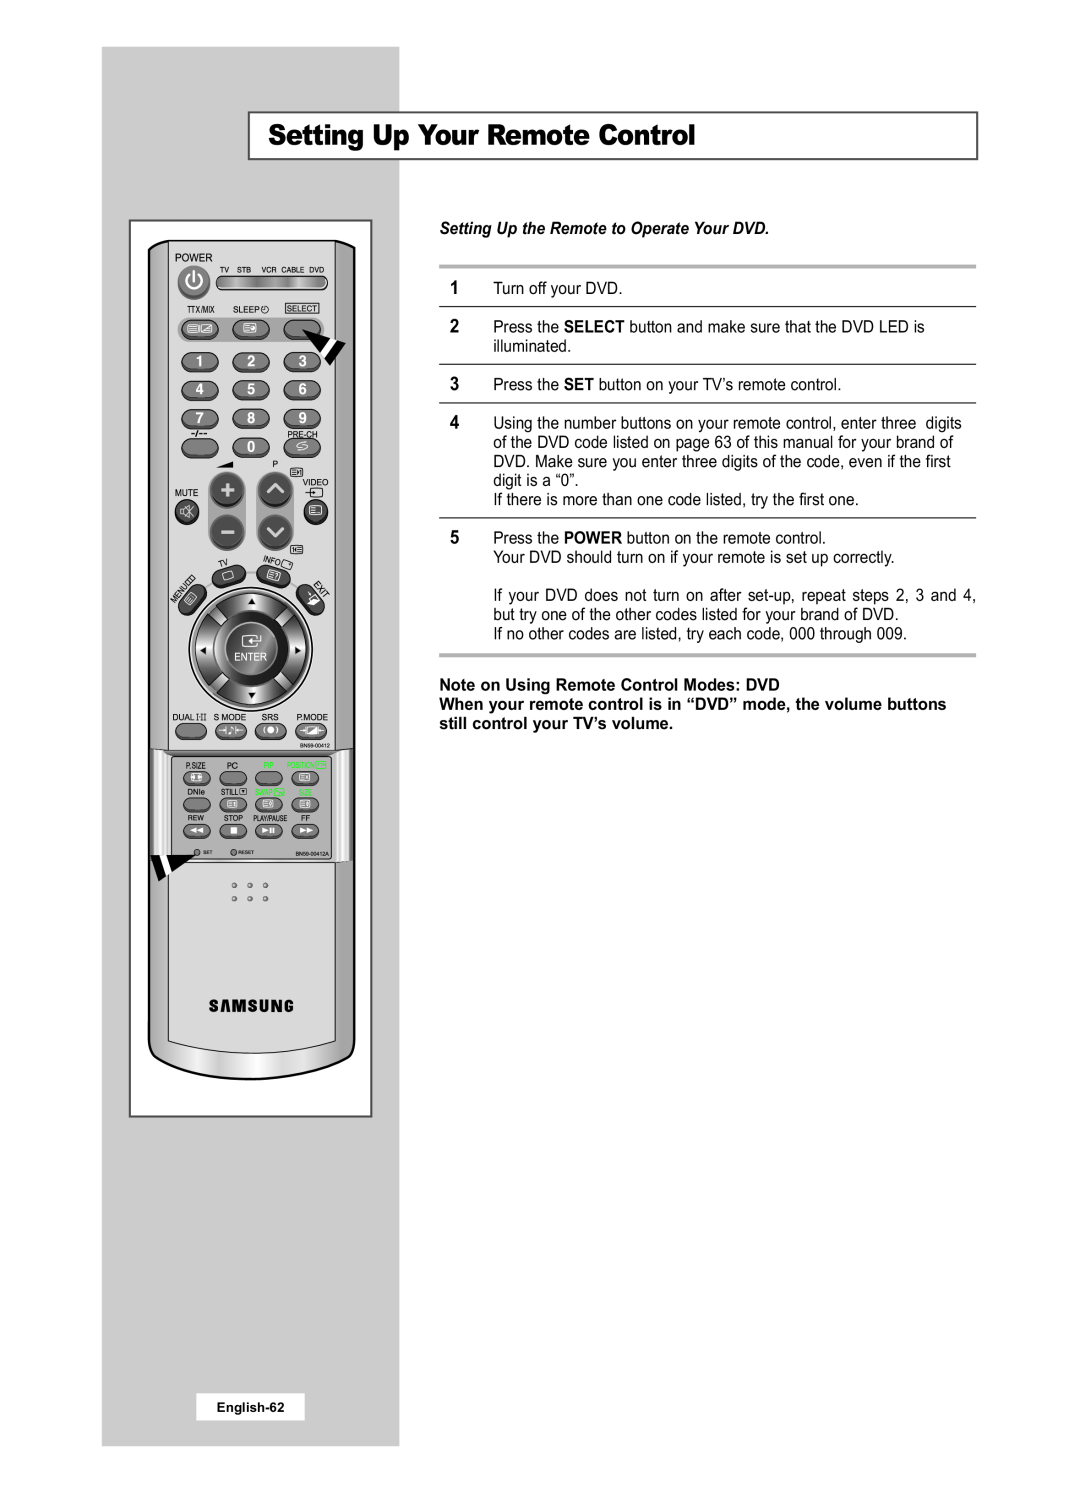 Samsung LA22N21B manual Setting Up the Remote to Operate Your DVD, Note on Using Remote Control Modes DVD 